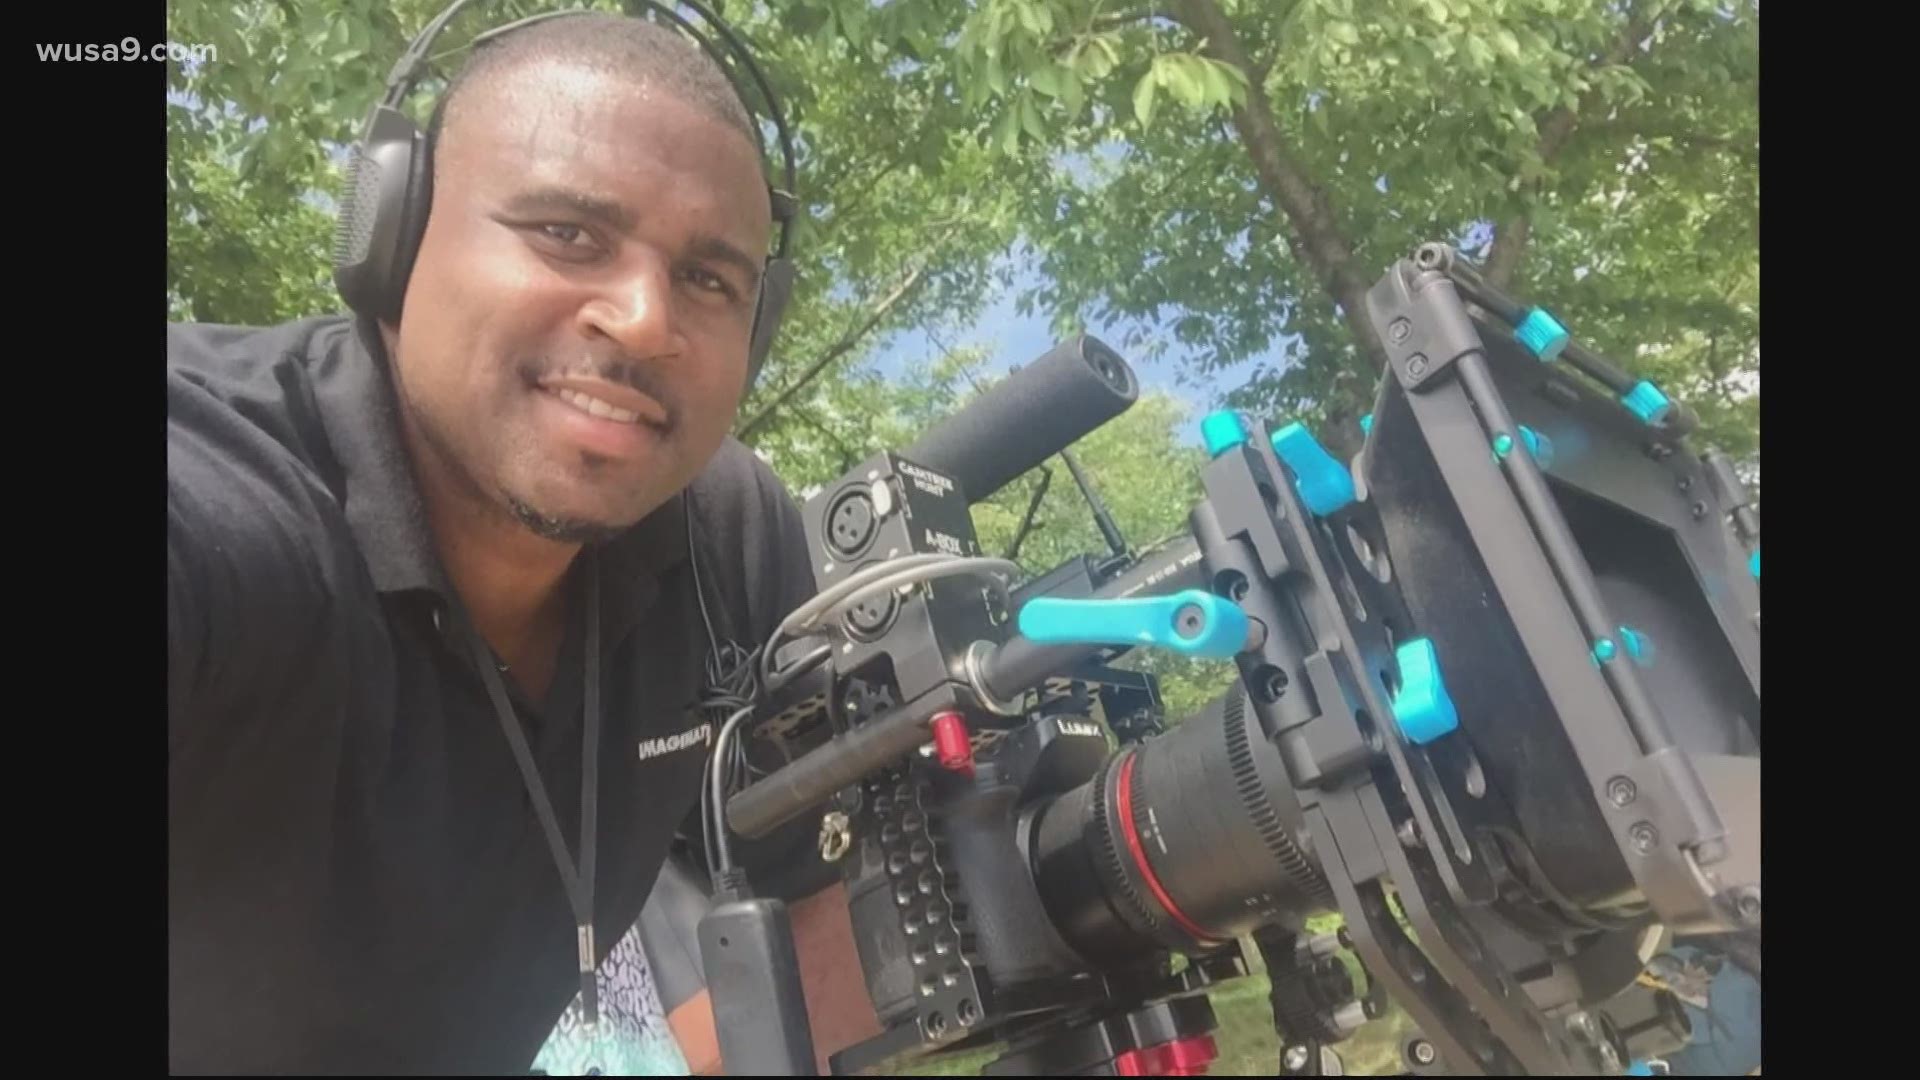 One Maryland man has been documenting the deaths of black people by police in a new film called the American LOWS.